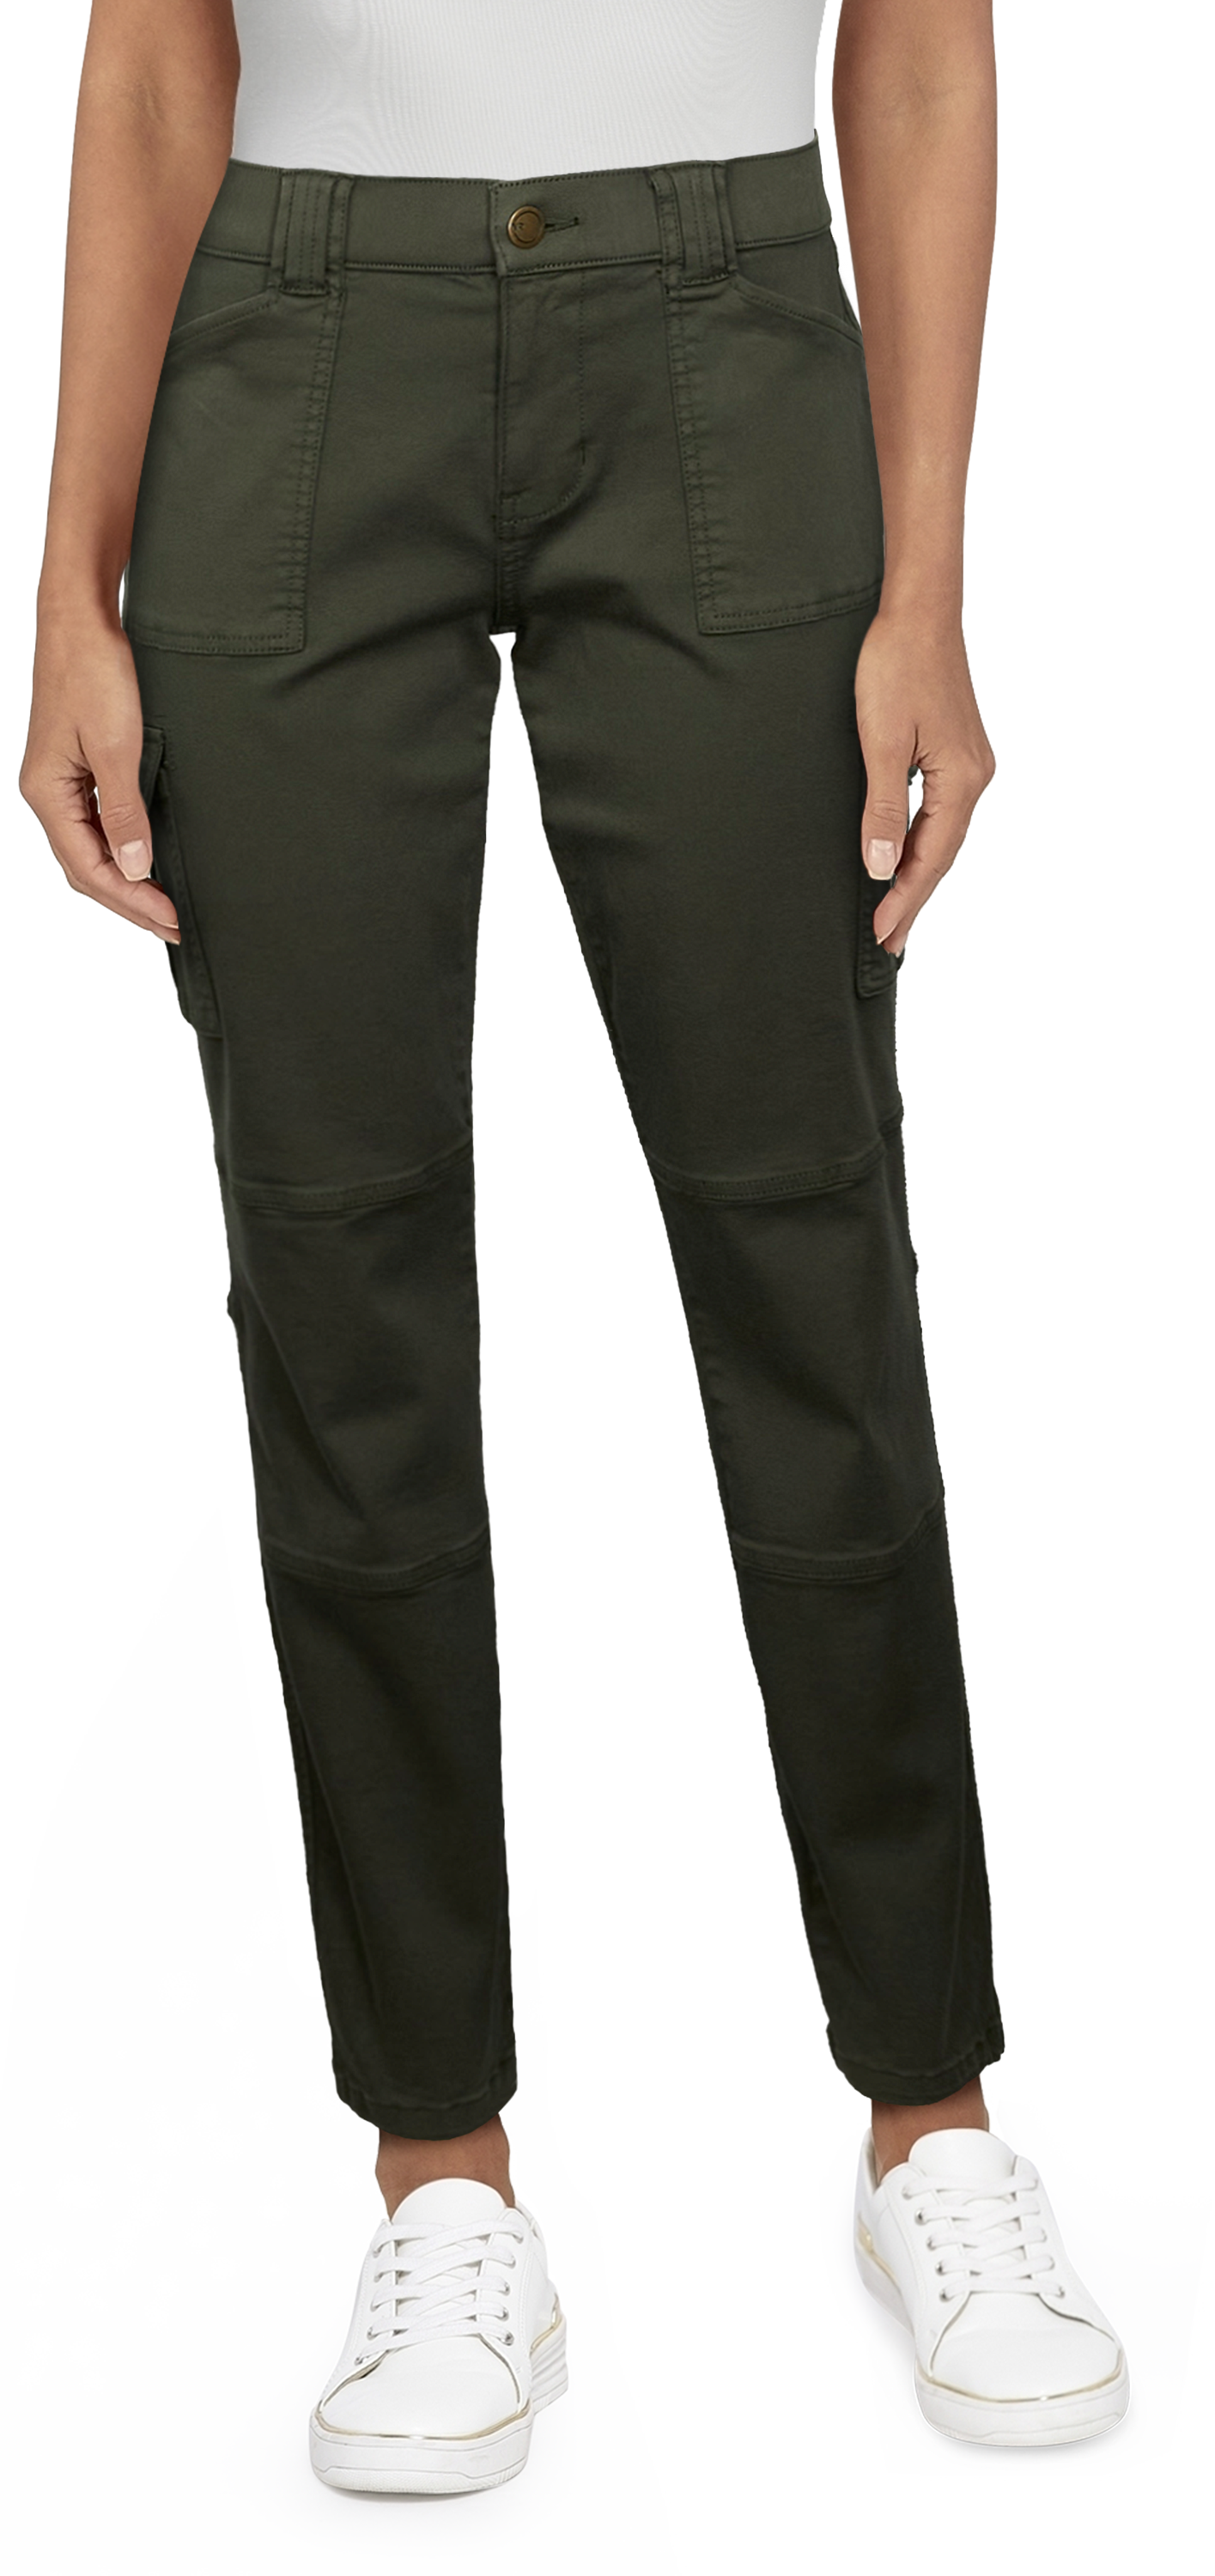 BUIgtTklOP Pants For Women Clearance Reflective Strip Beam Pants Casual  Sports Trousers Cargo Pants 